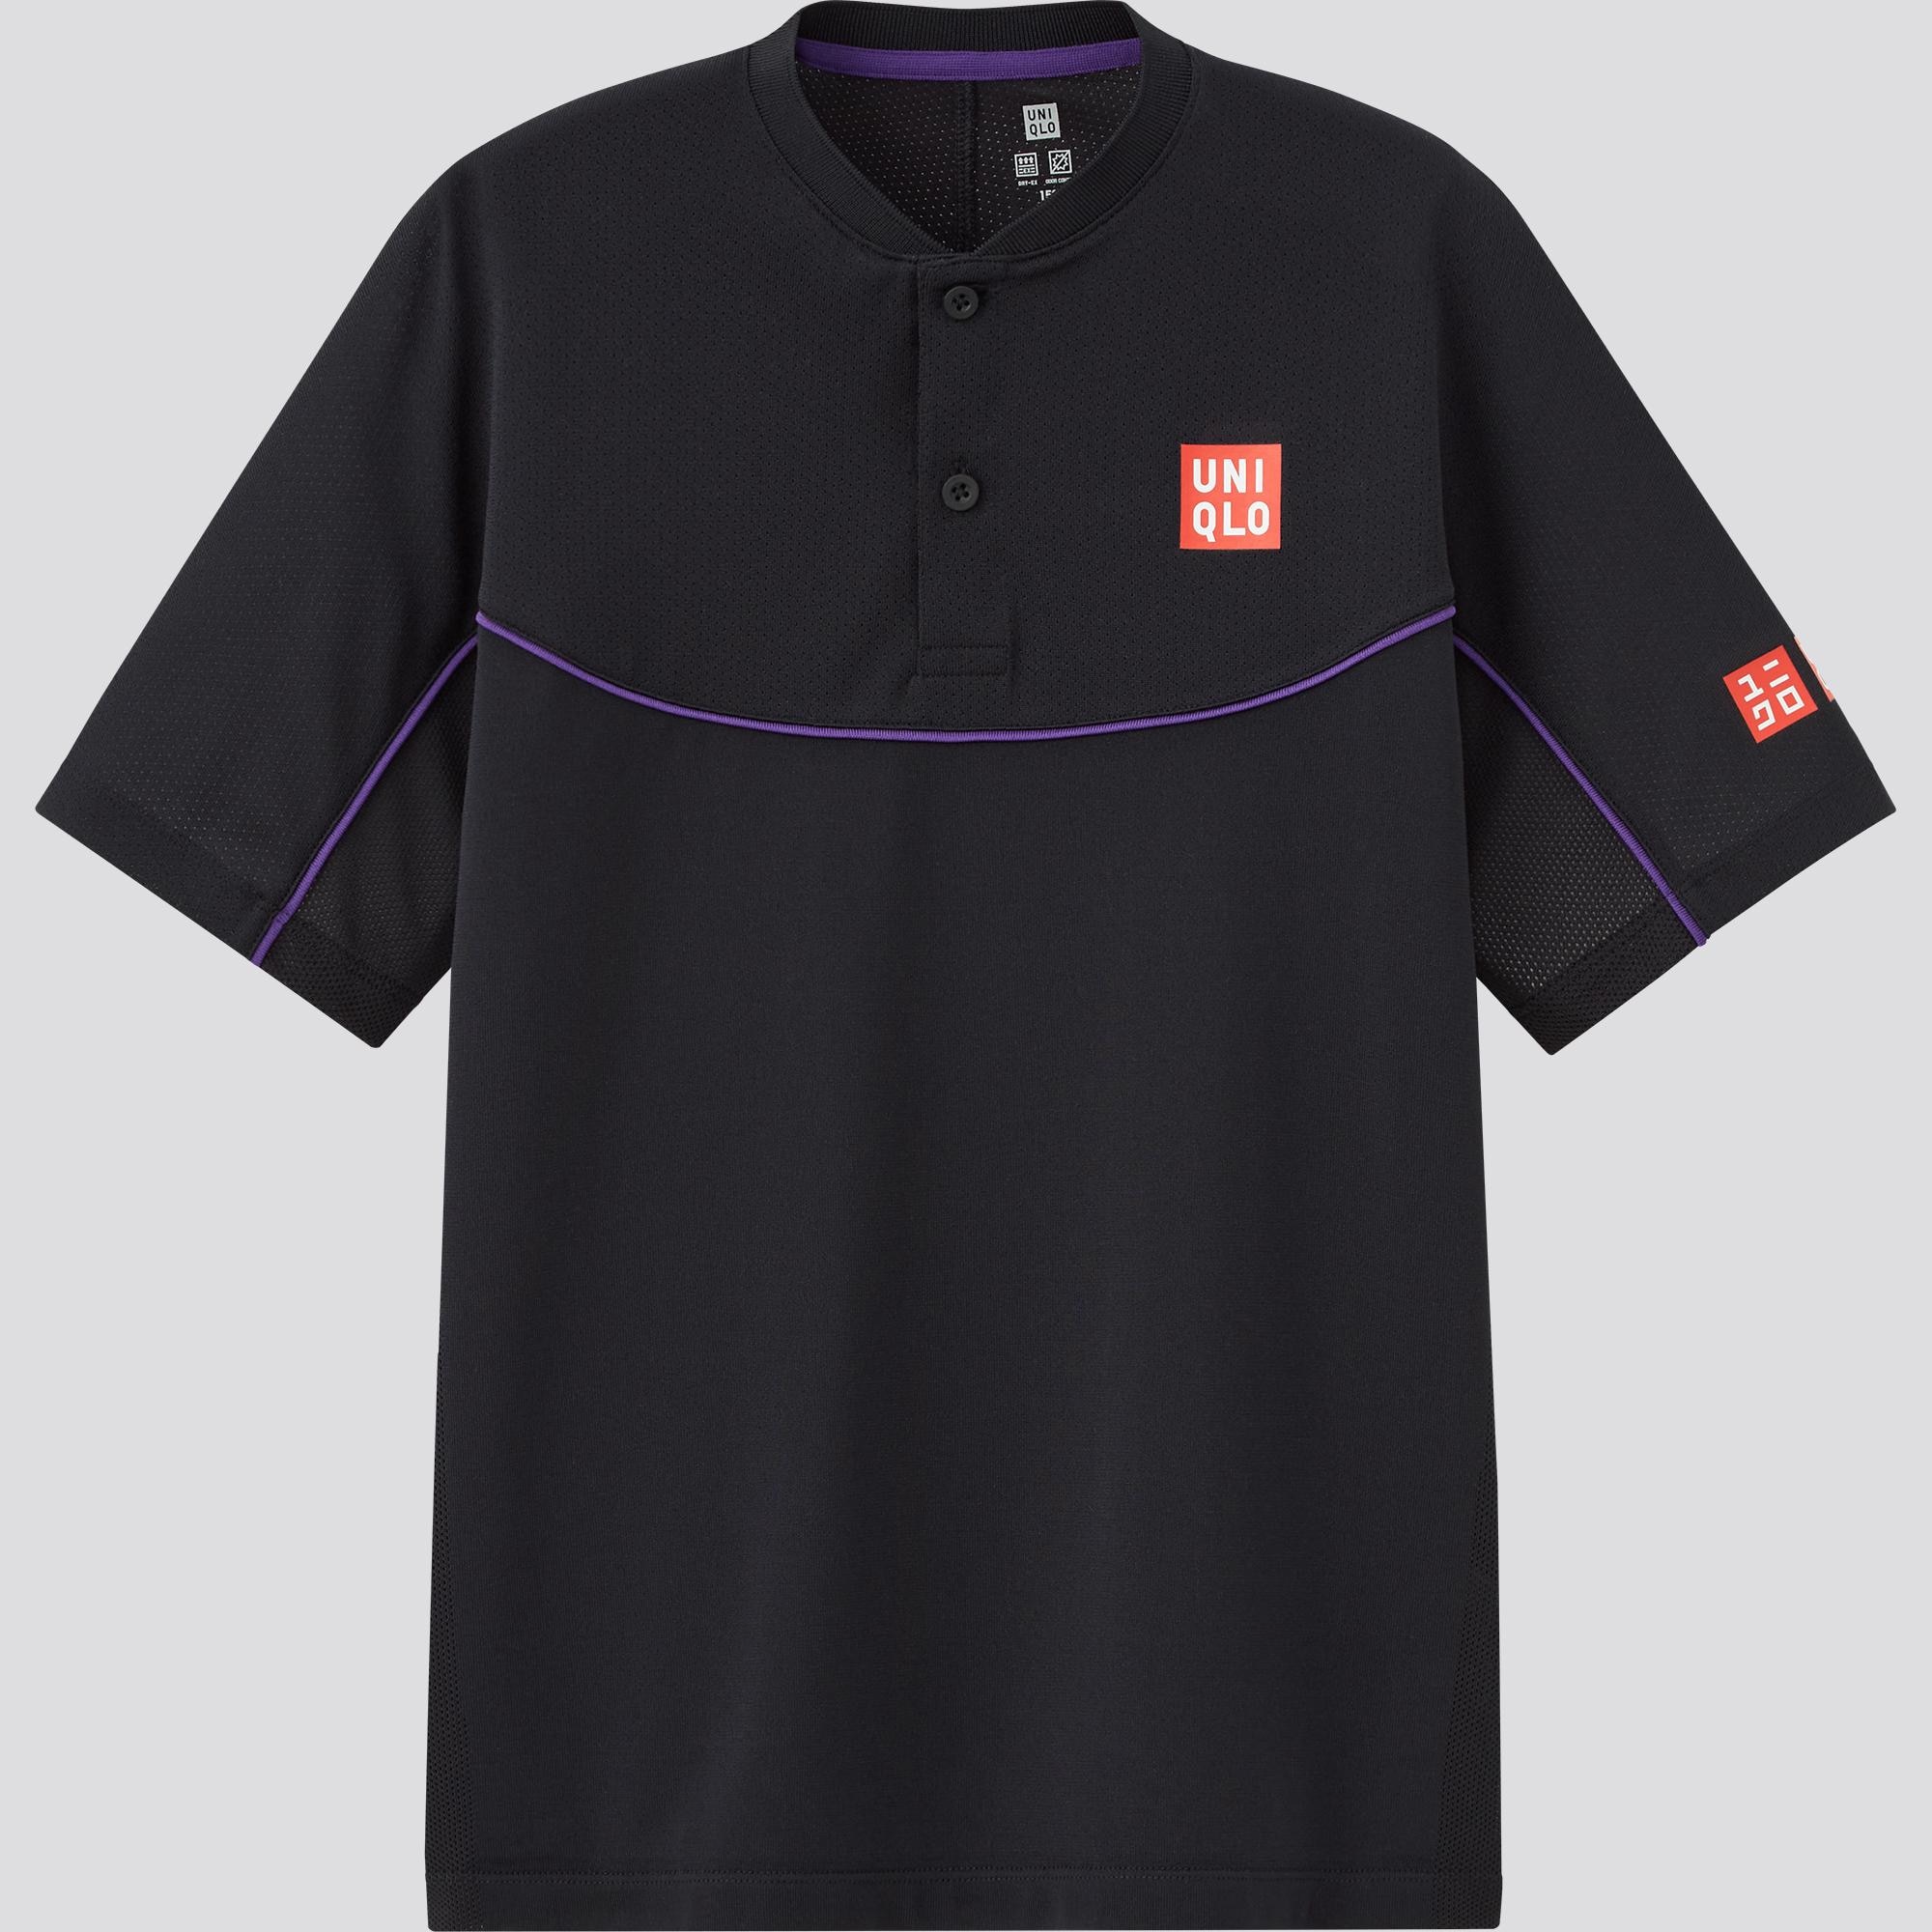 Adam Scott to Play at 2016 Masters Tournament in Golfwear CoDeveloped with  UNIQLO